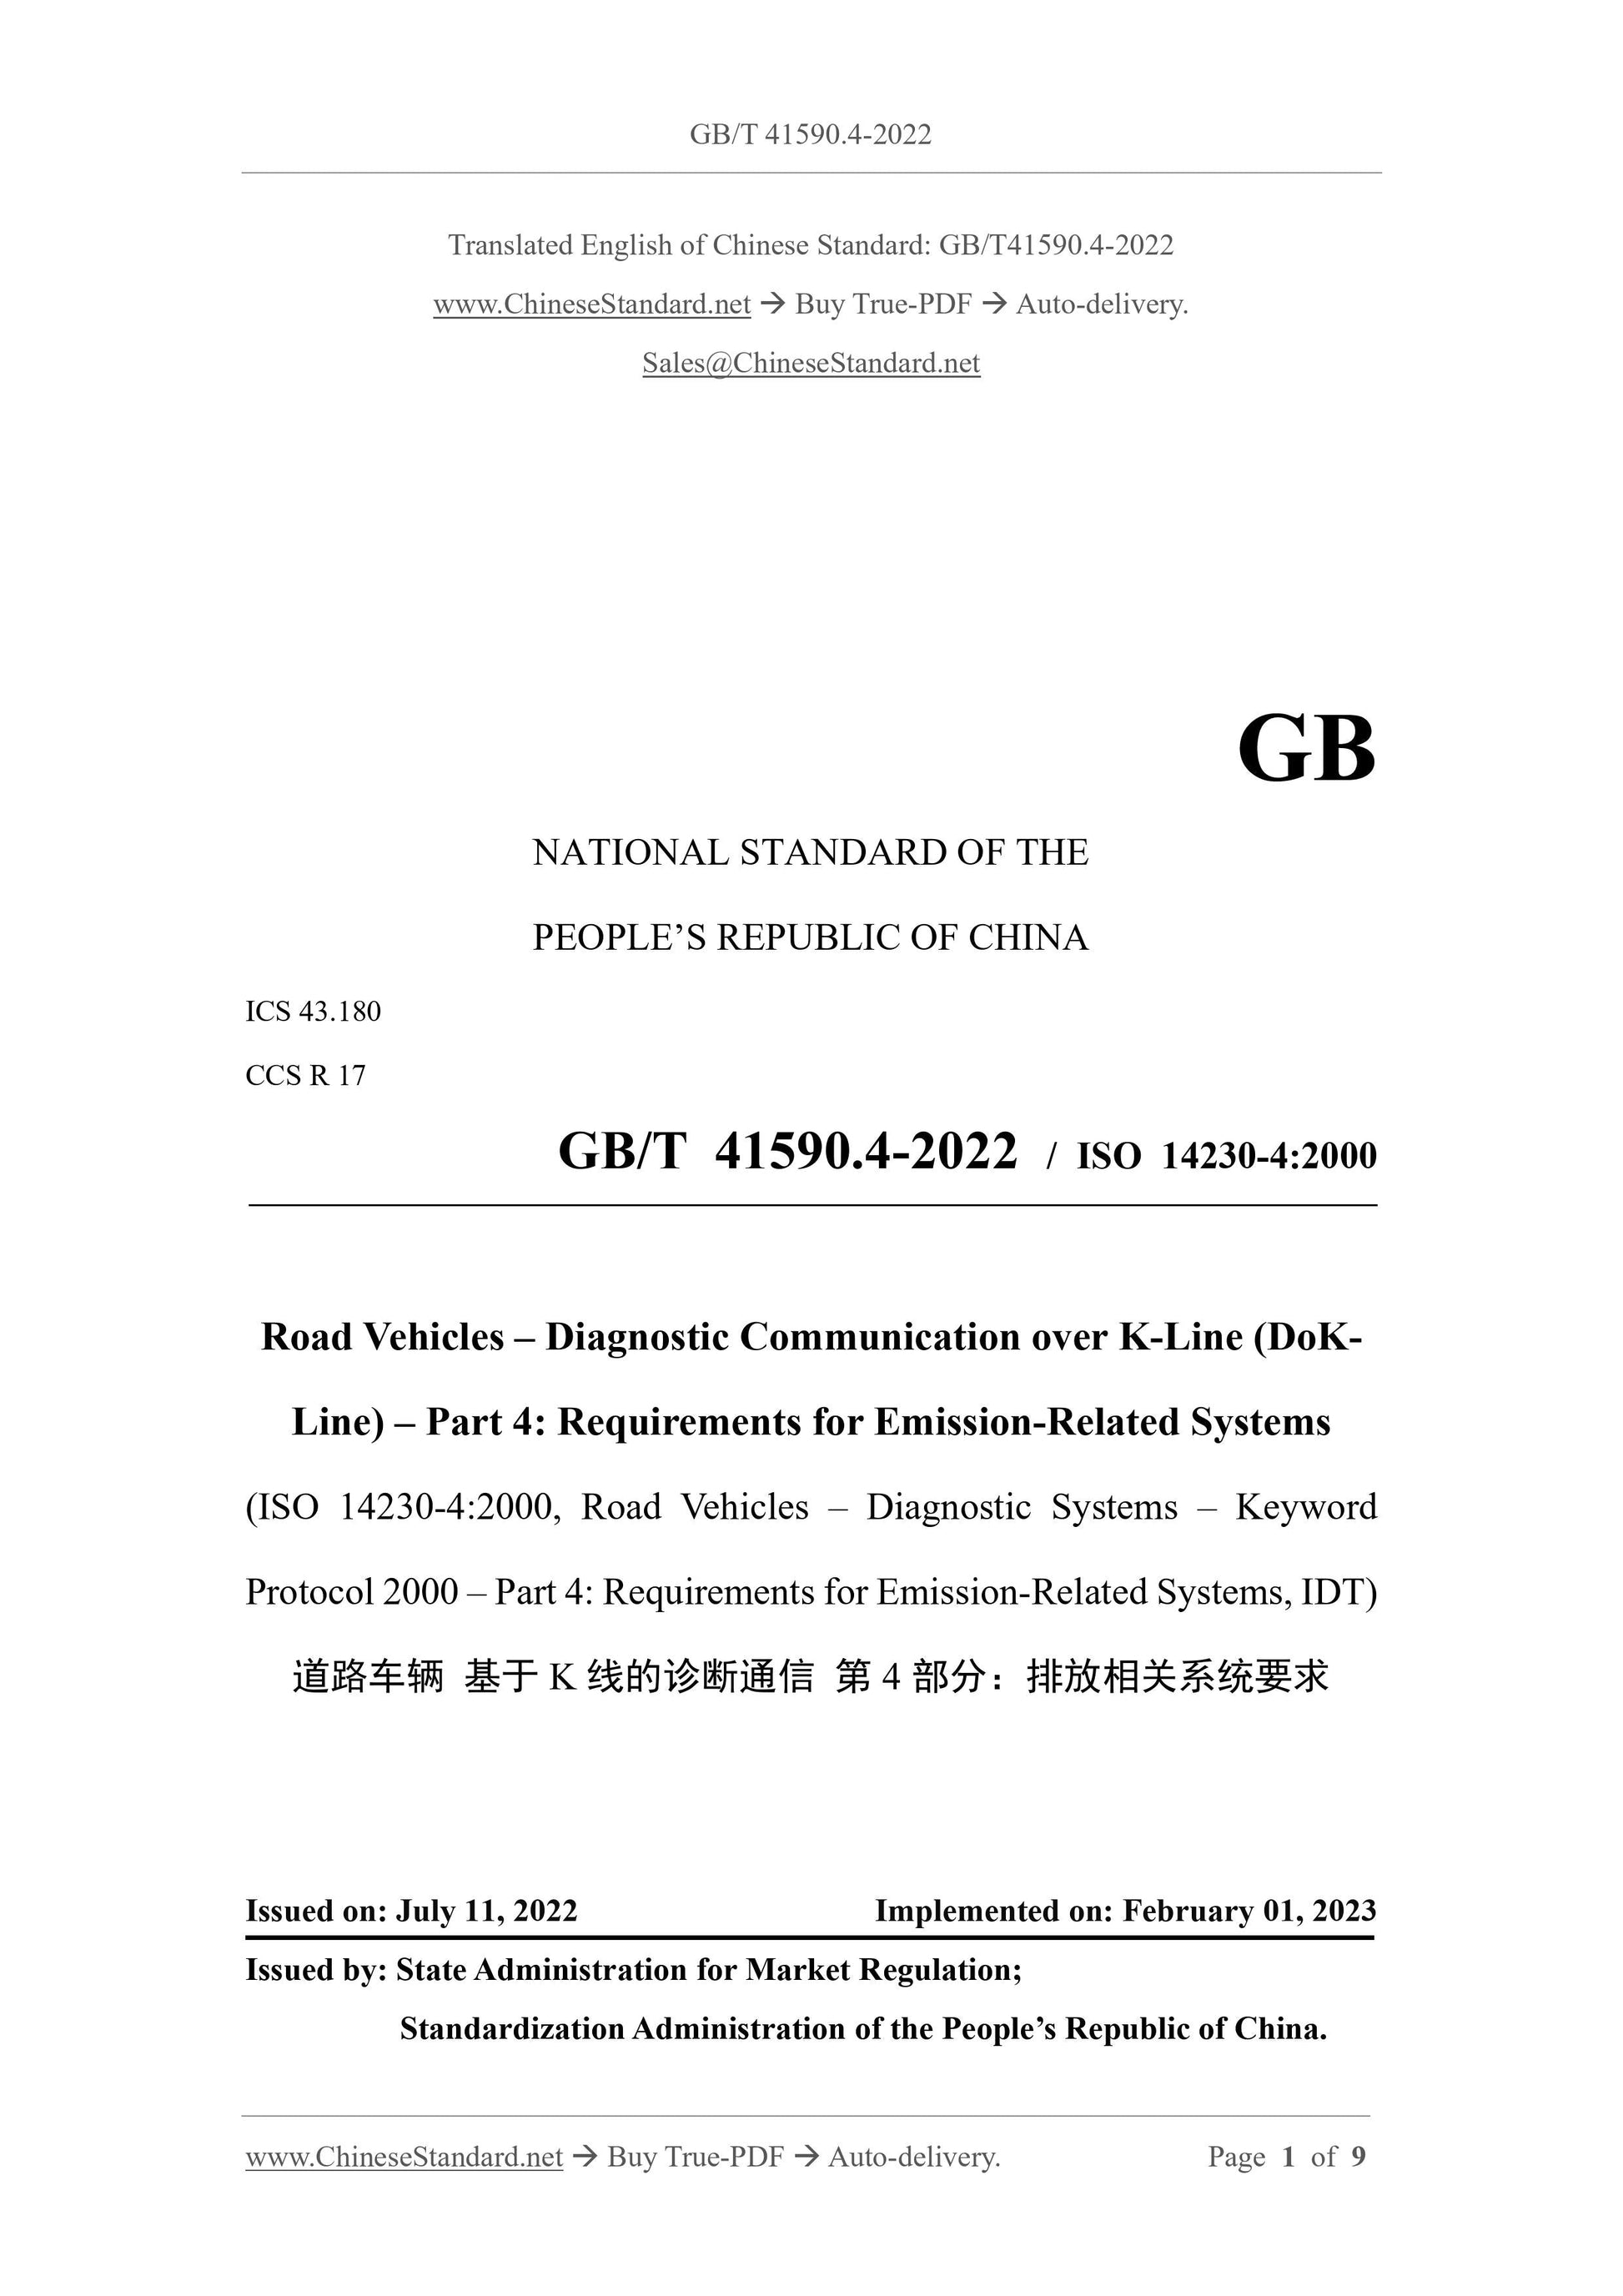 GB/T 41590.4-2022 Page 1